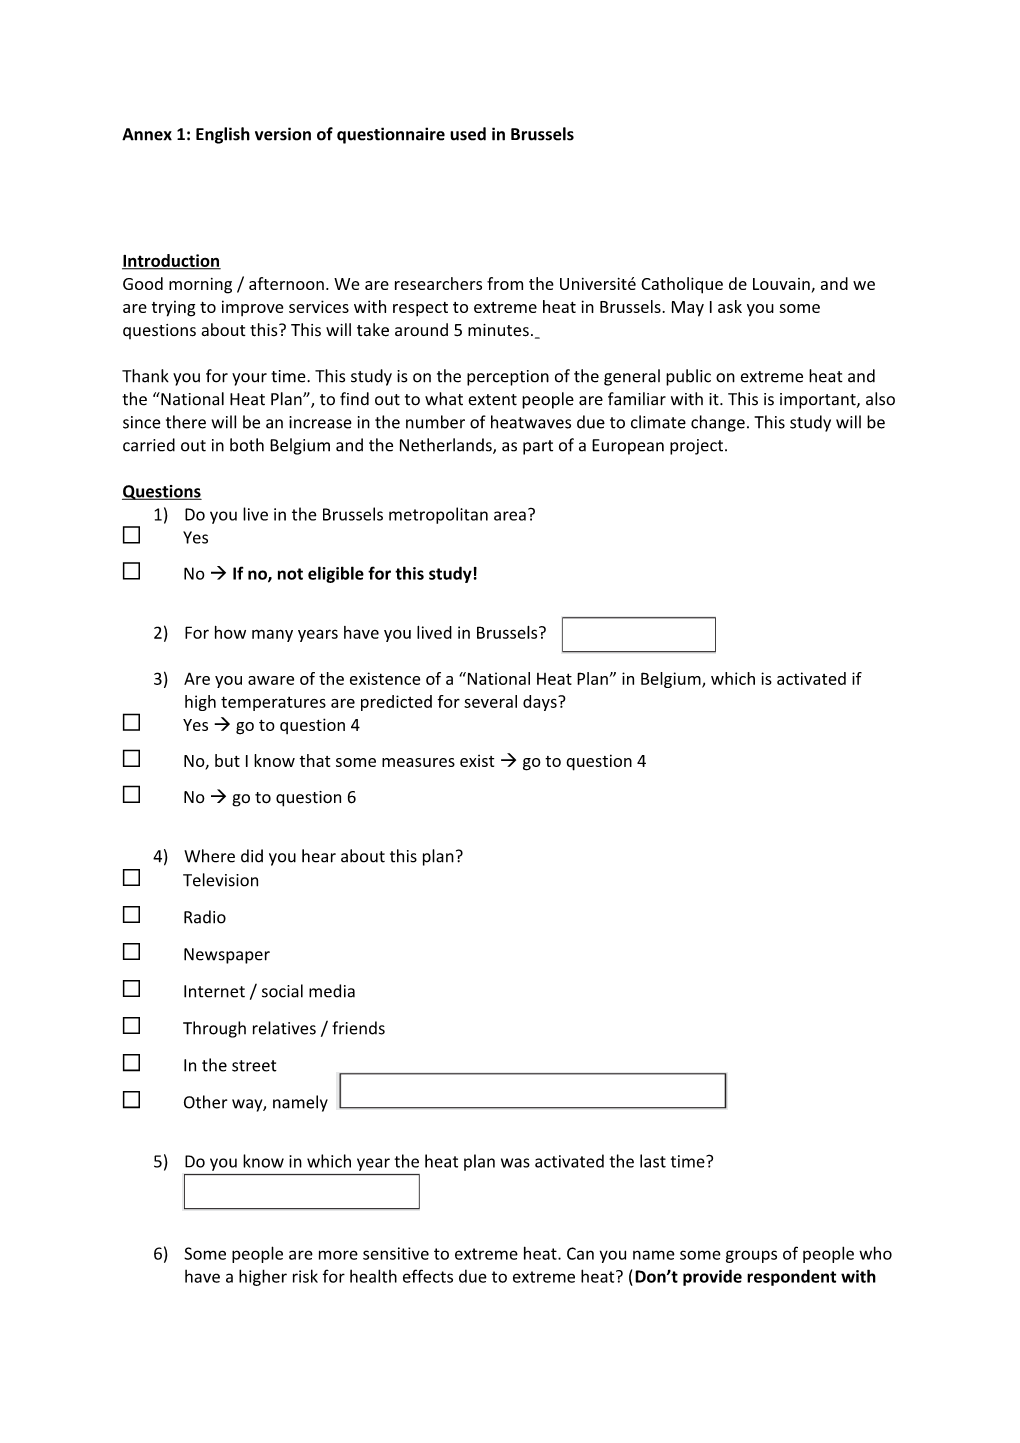 Annex 1: English Version of Questionnaire Used in Brussels